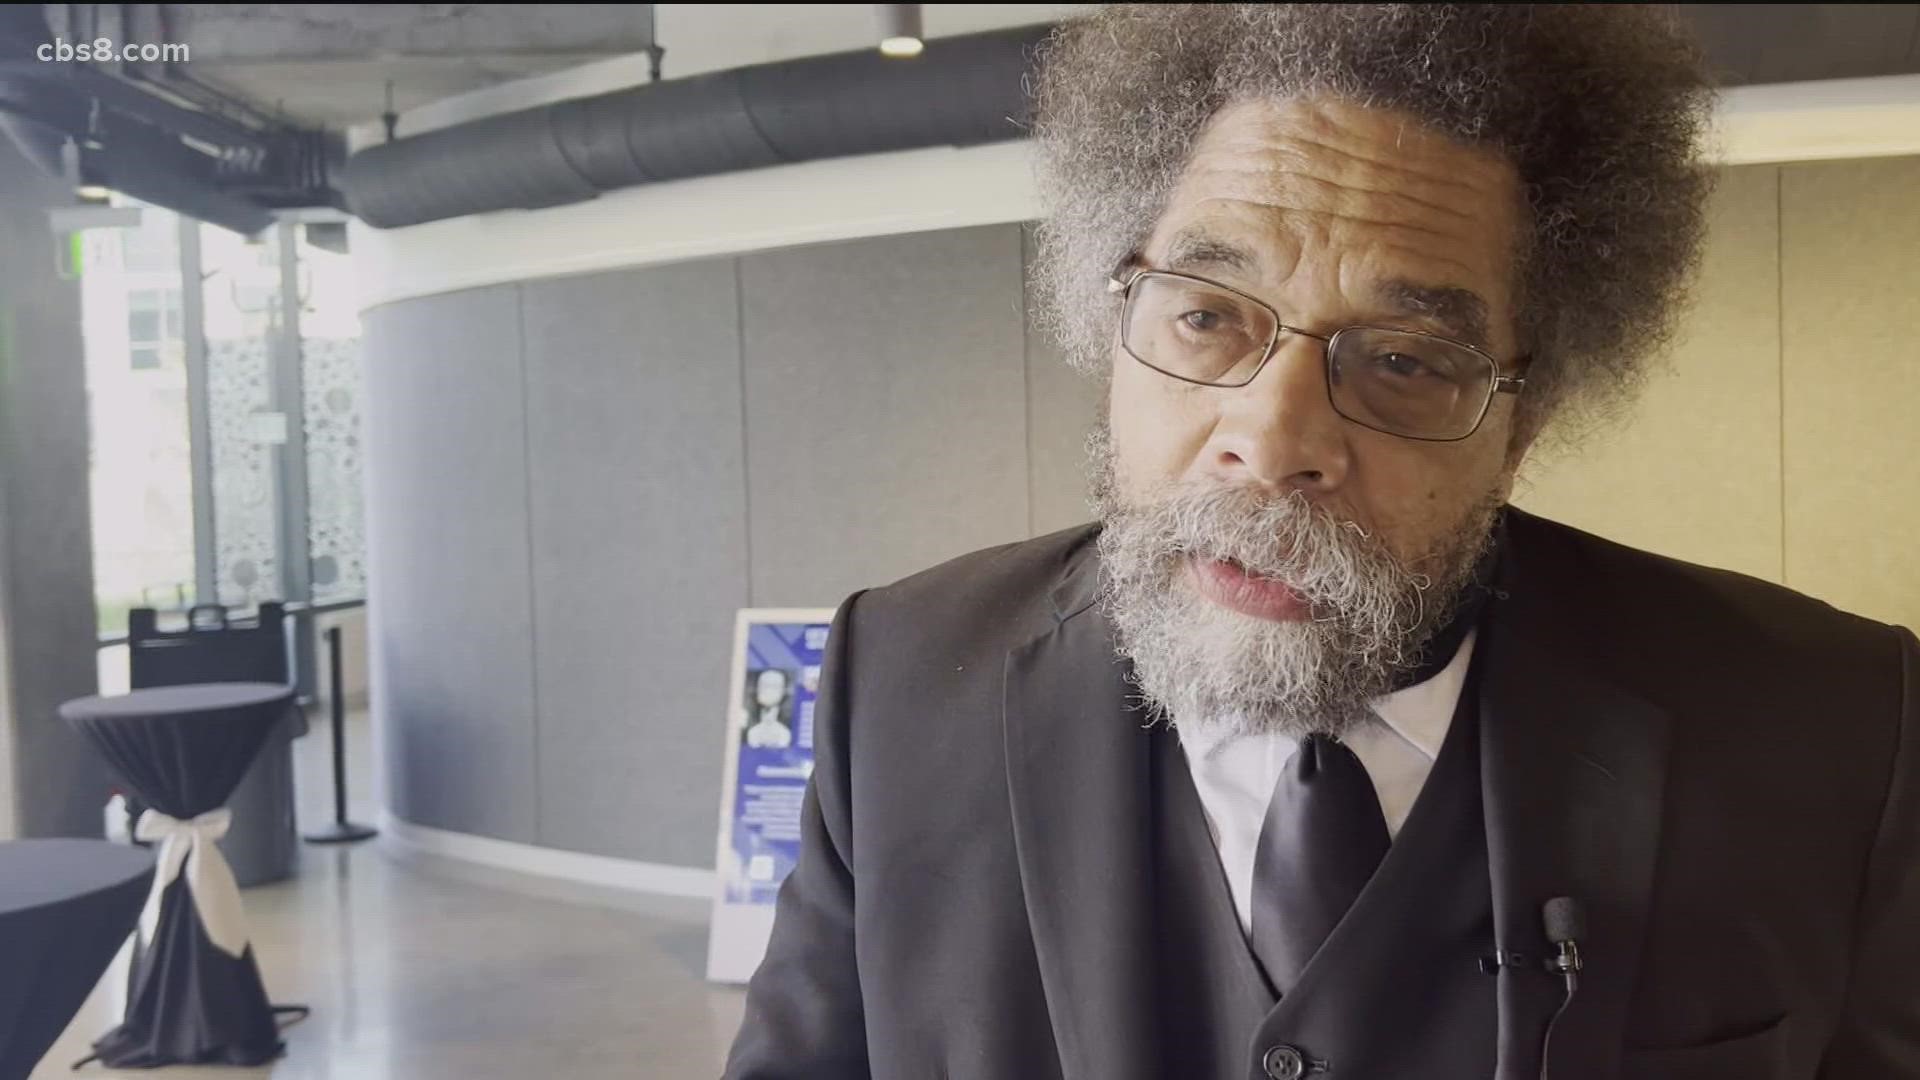 Social justice advocate and philosopher, Dr. Cornel West visited San Diego to talk to middle school and high school students, many from underserved communities